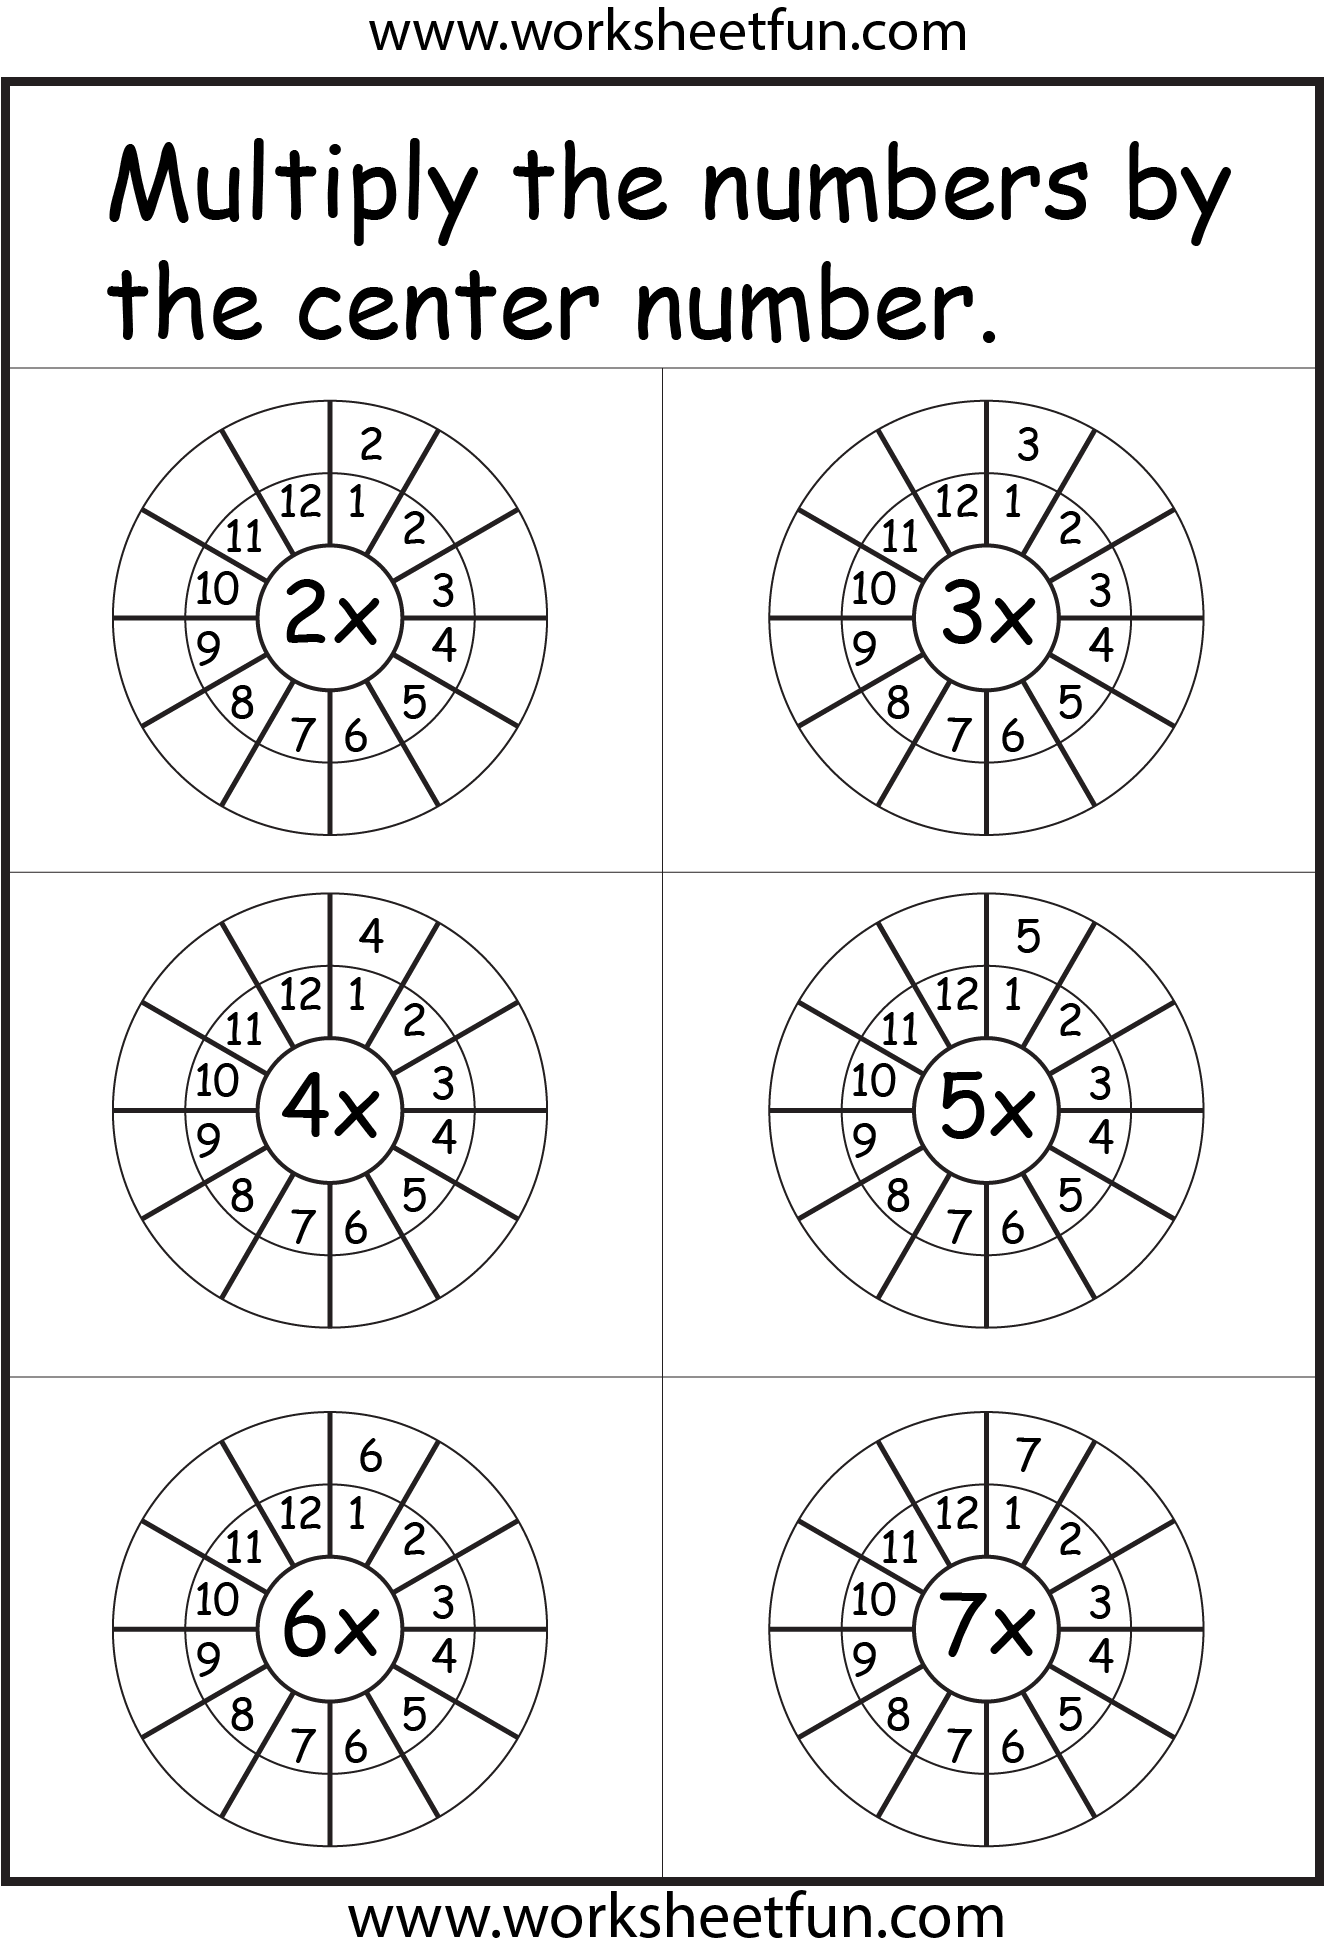 Times Table Worksheets – 1, 2, 3, 4, 5, 6, 7, 8, 9, 10, 11 ...